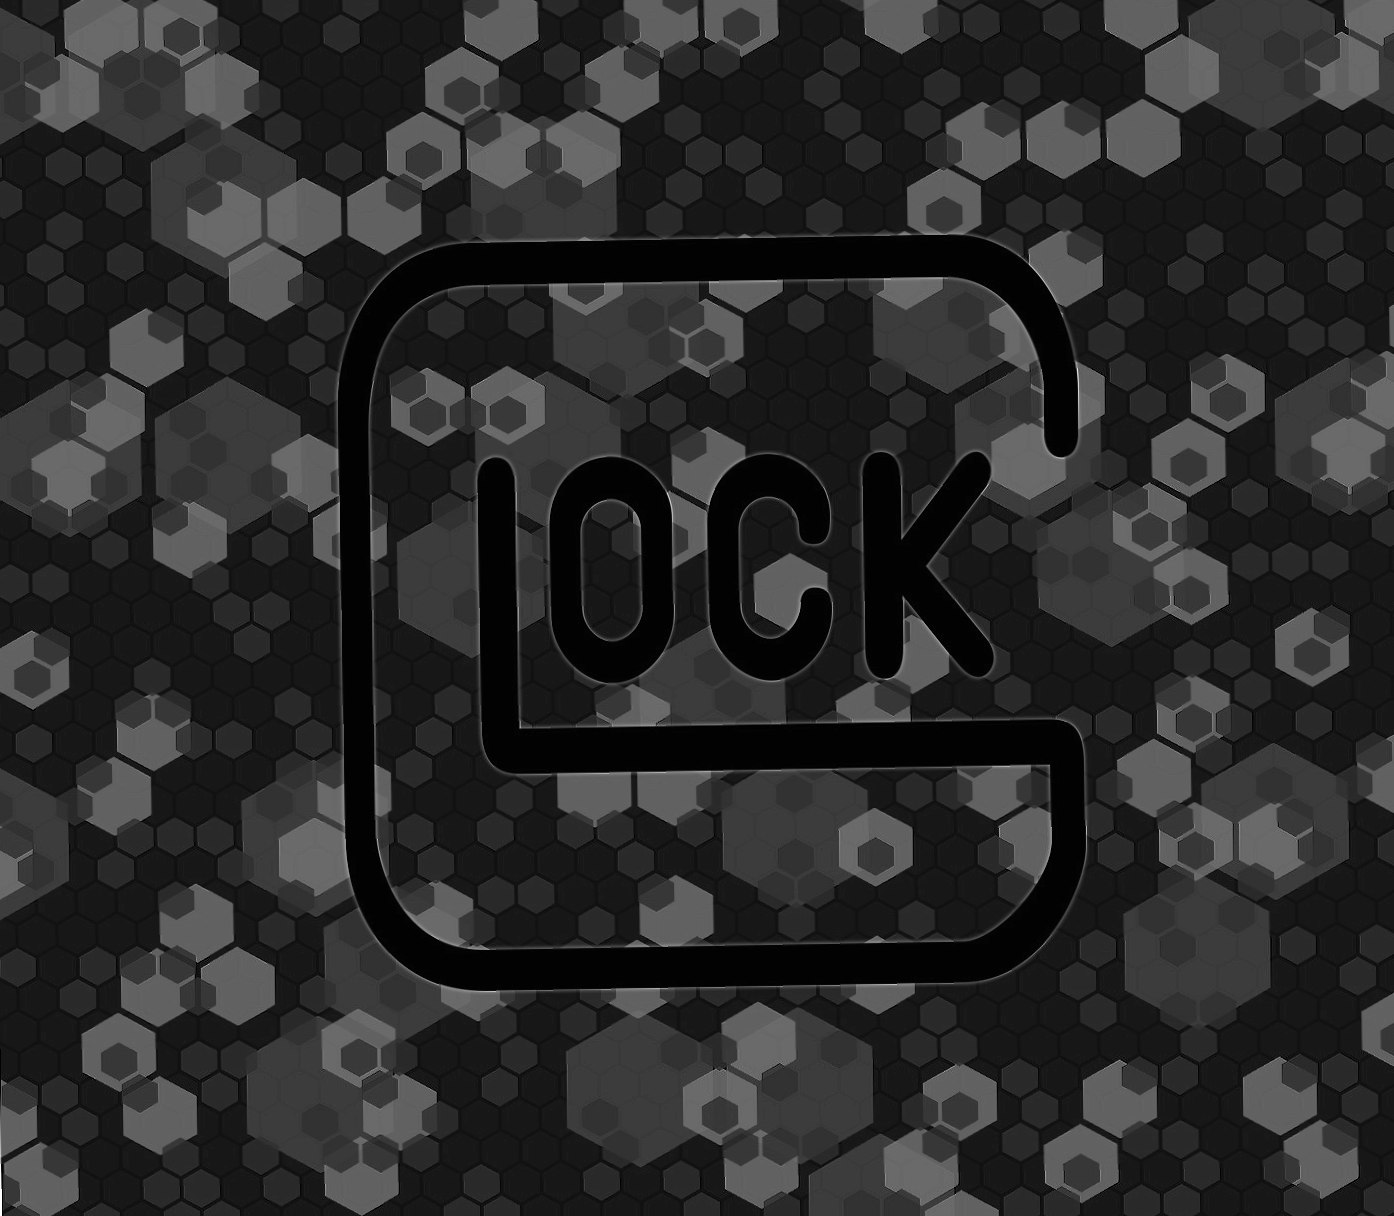 Glock wallpapers HD quality